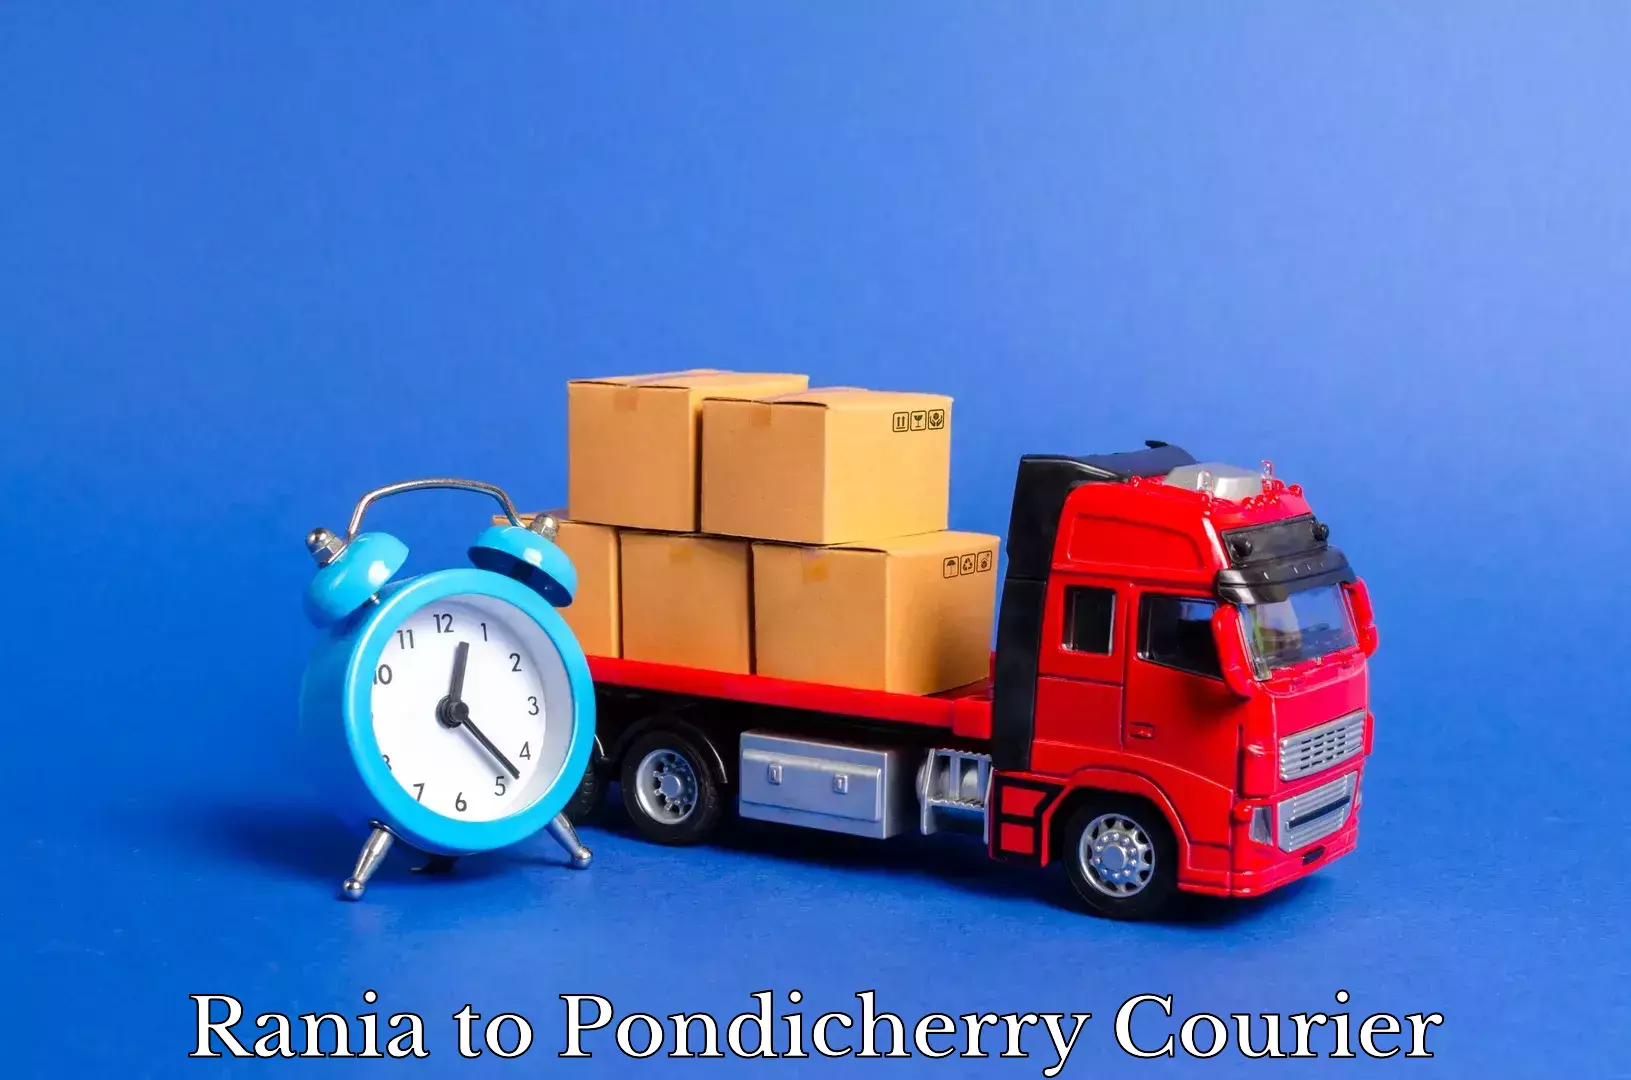 Furniture moving specialists Rania to Pondicherry